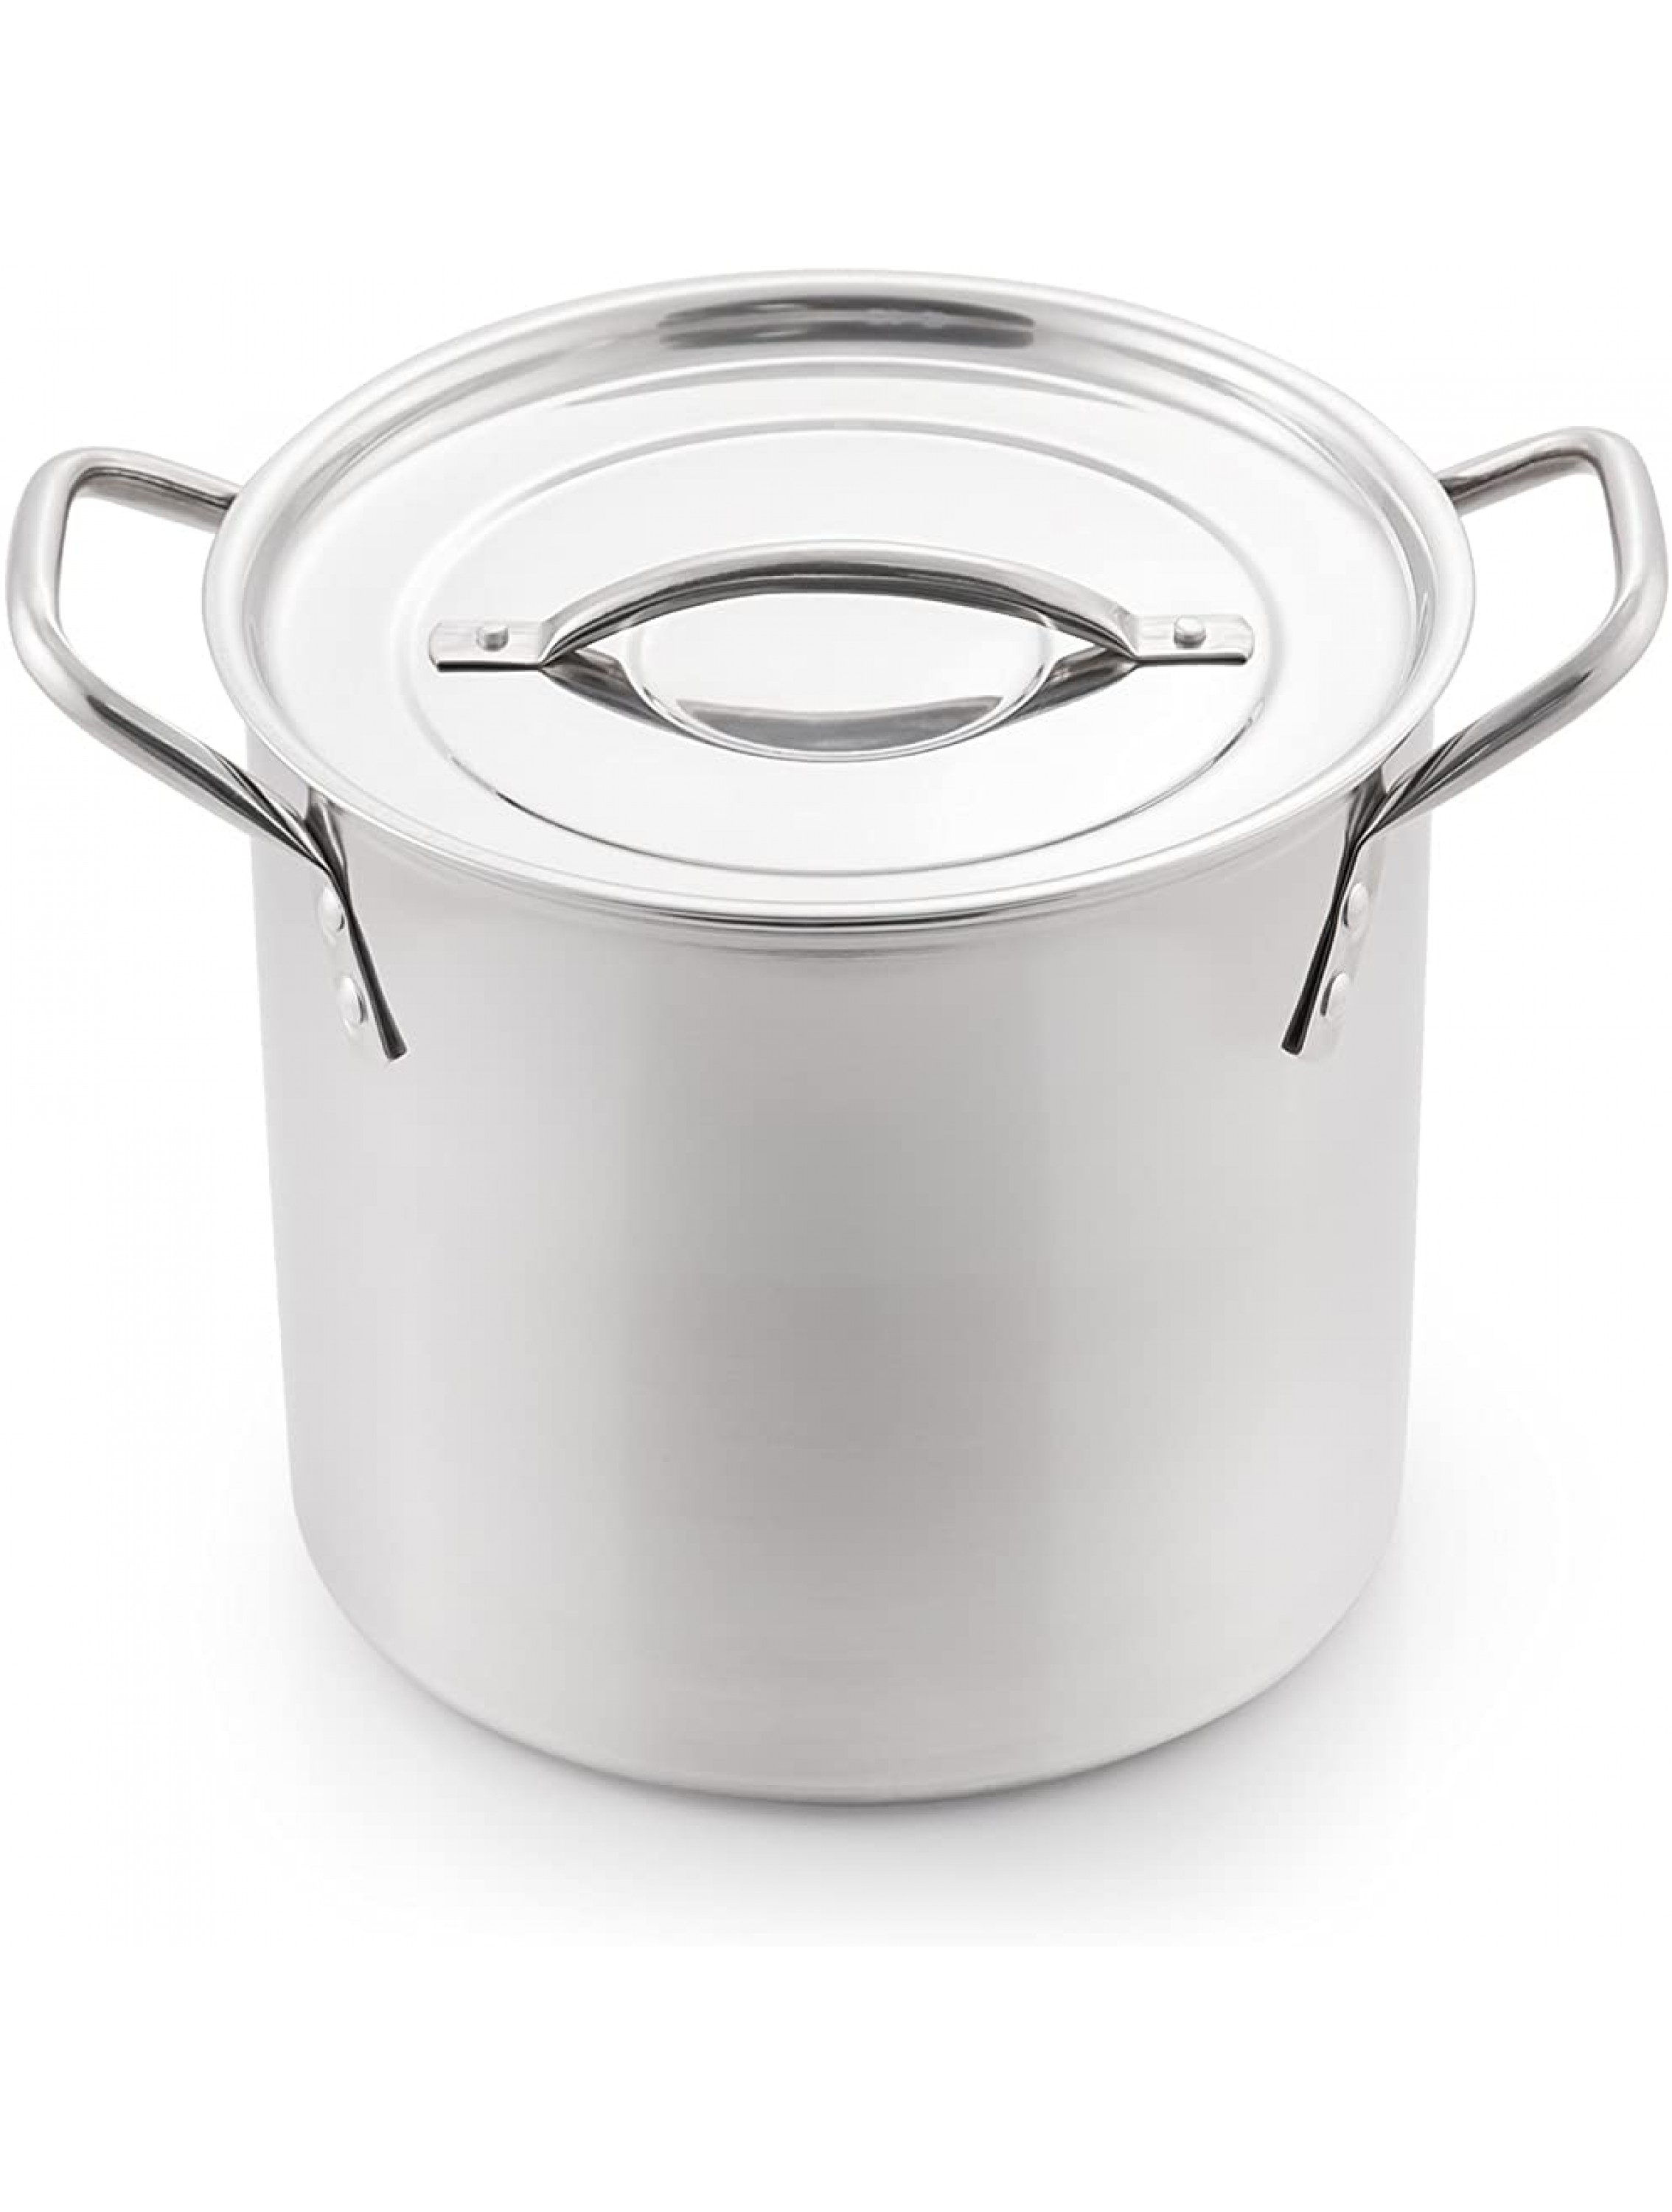 McSunley Medium N Cook Stockpot 8 Quart Silver Stainless Steel All Purpose Prep and Canning Bowl - BBQUTE1W8